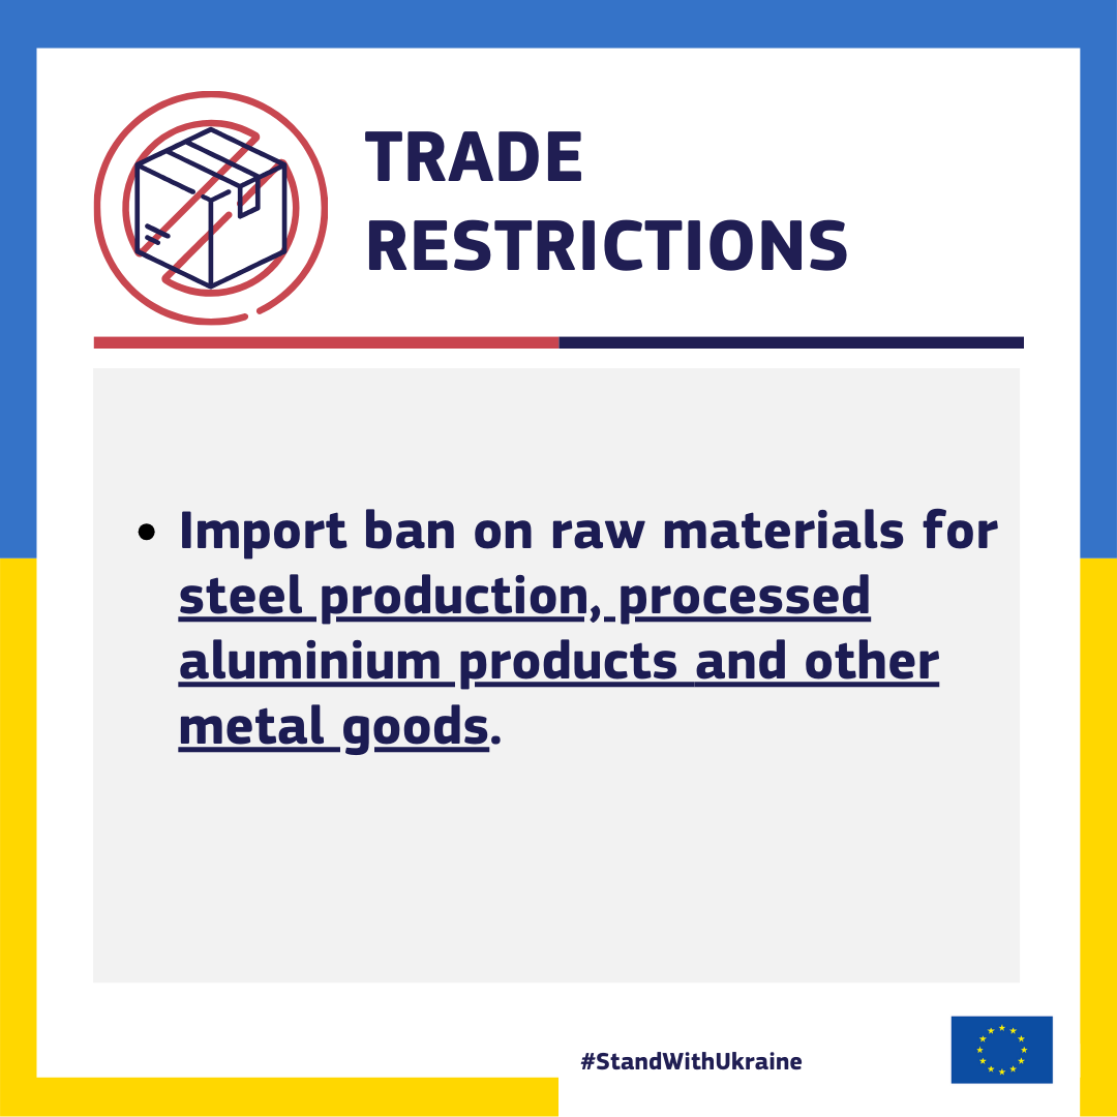 TRADE RESTRICTIONS